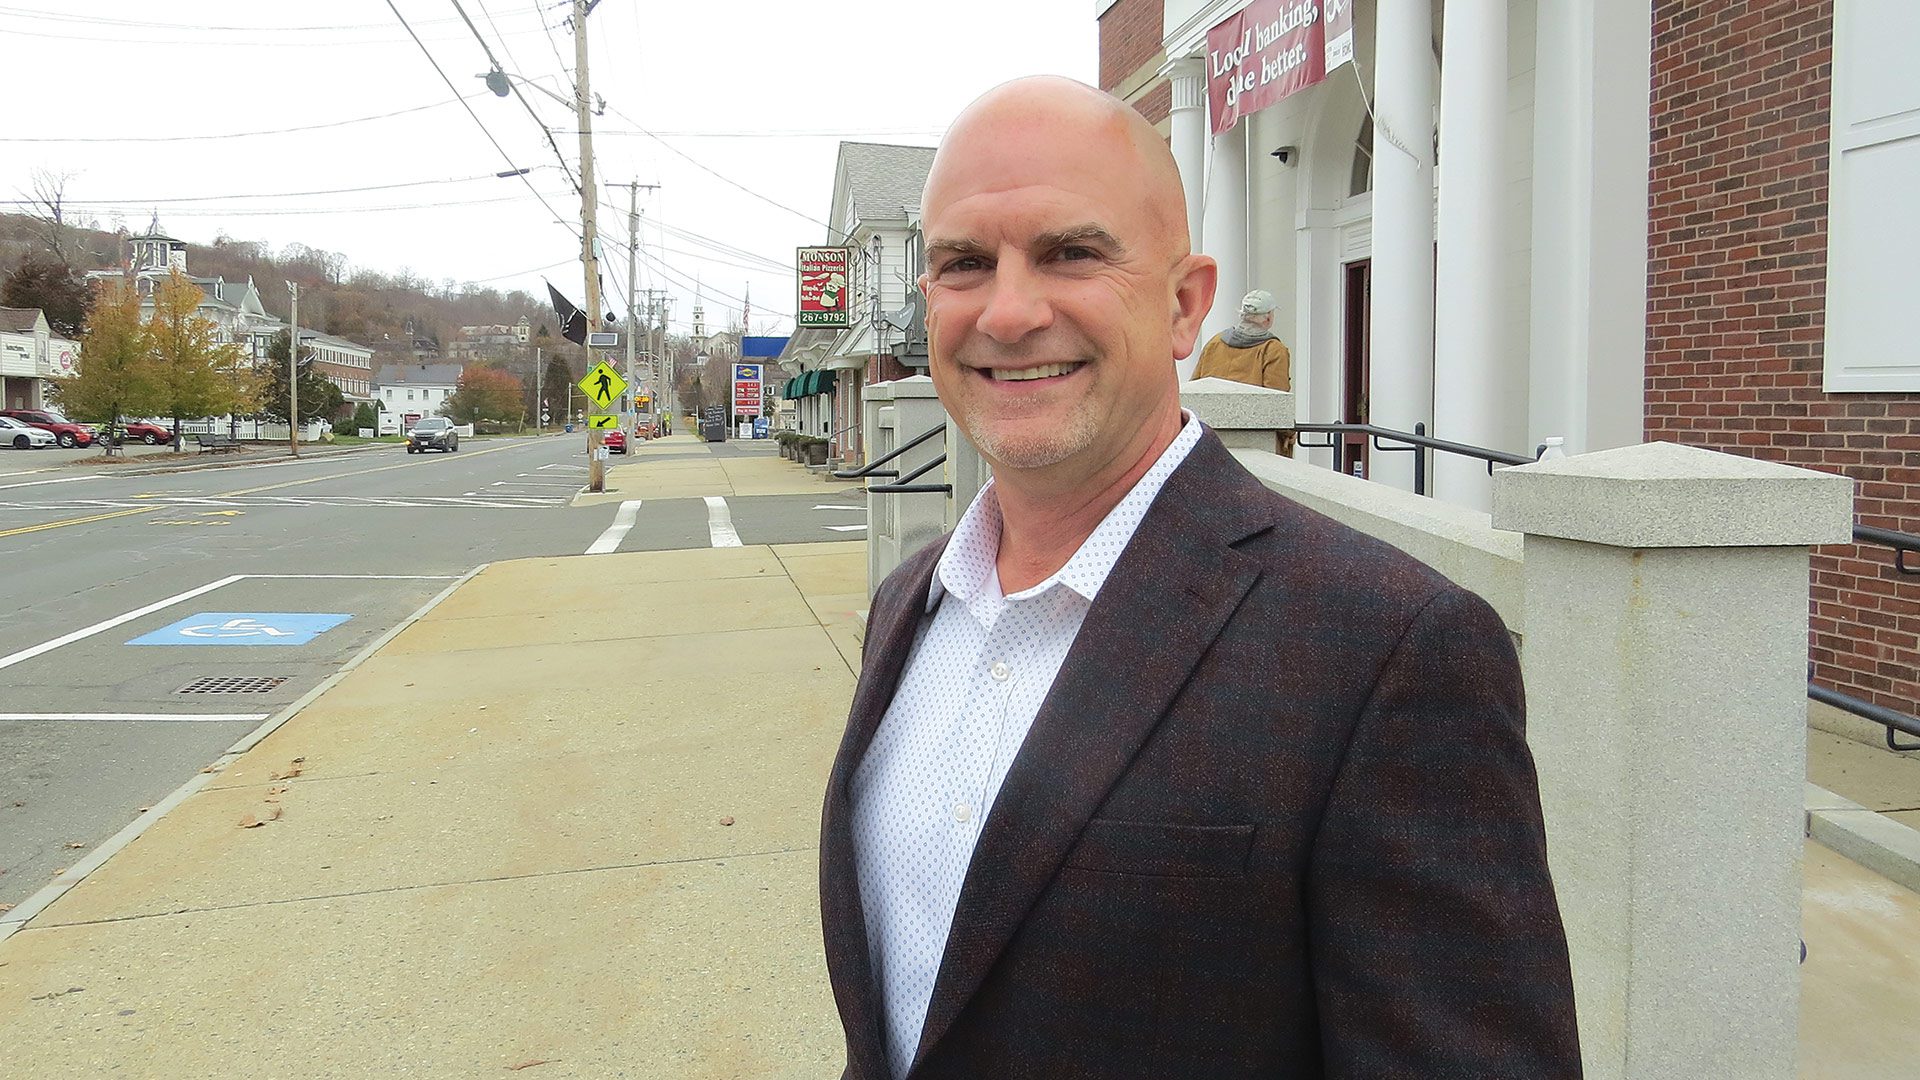 Dan Moriarty says the broad goal in Monson is to attract new business